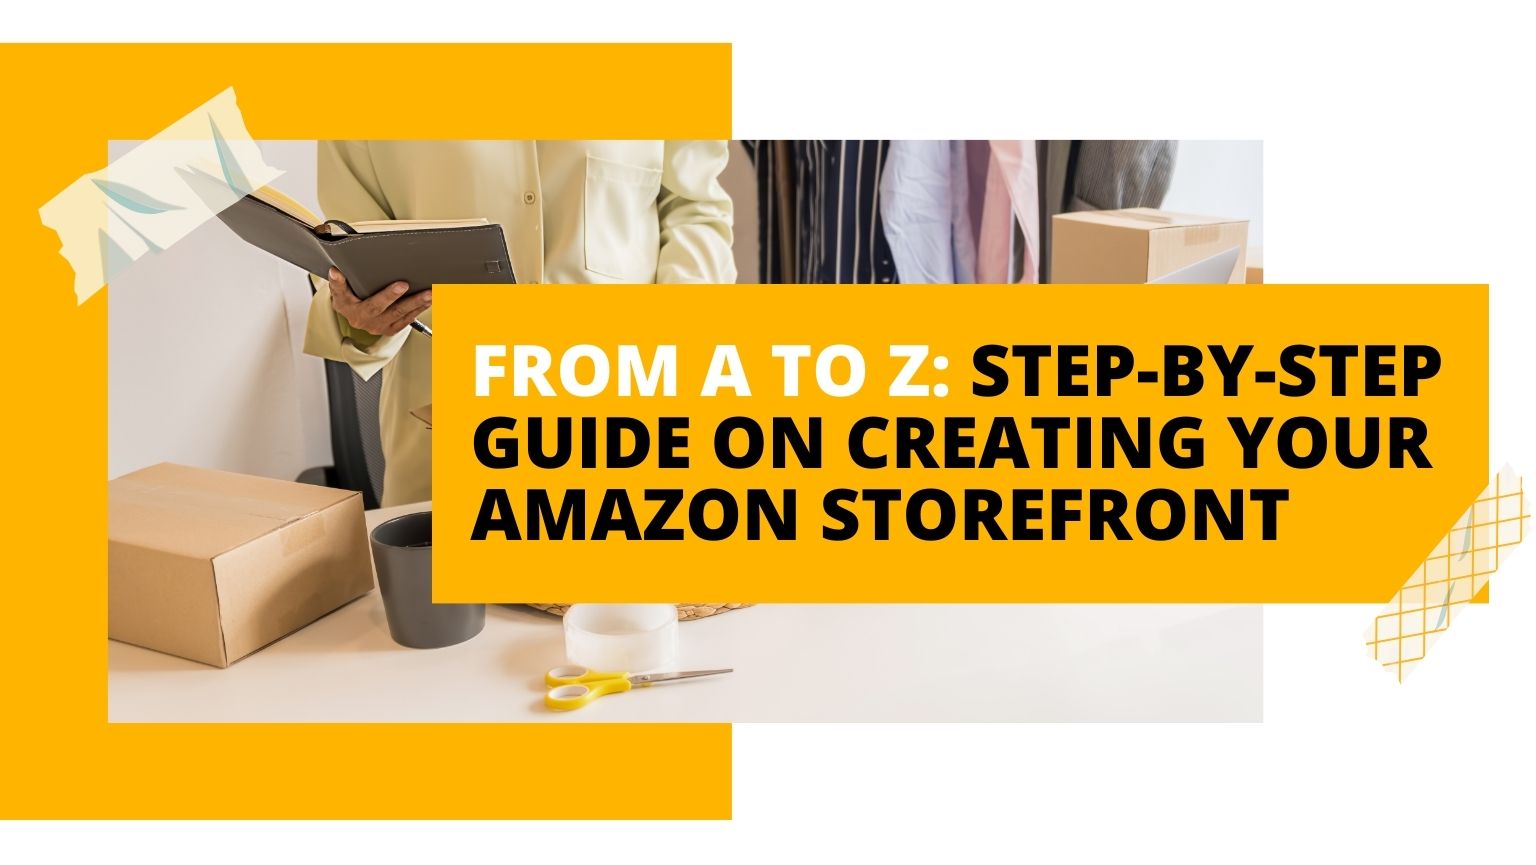 Step-by-Step Guide on Creating Your Amazon Storefront